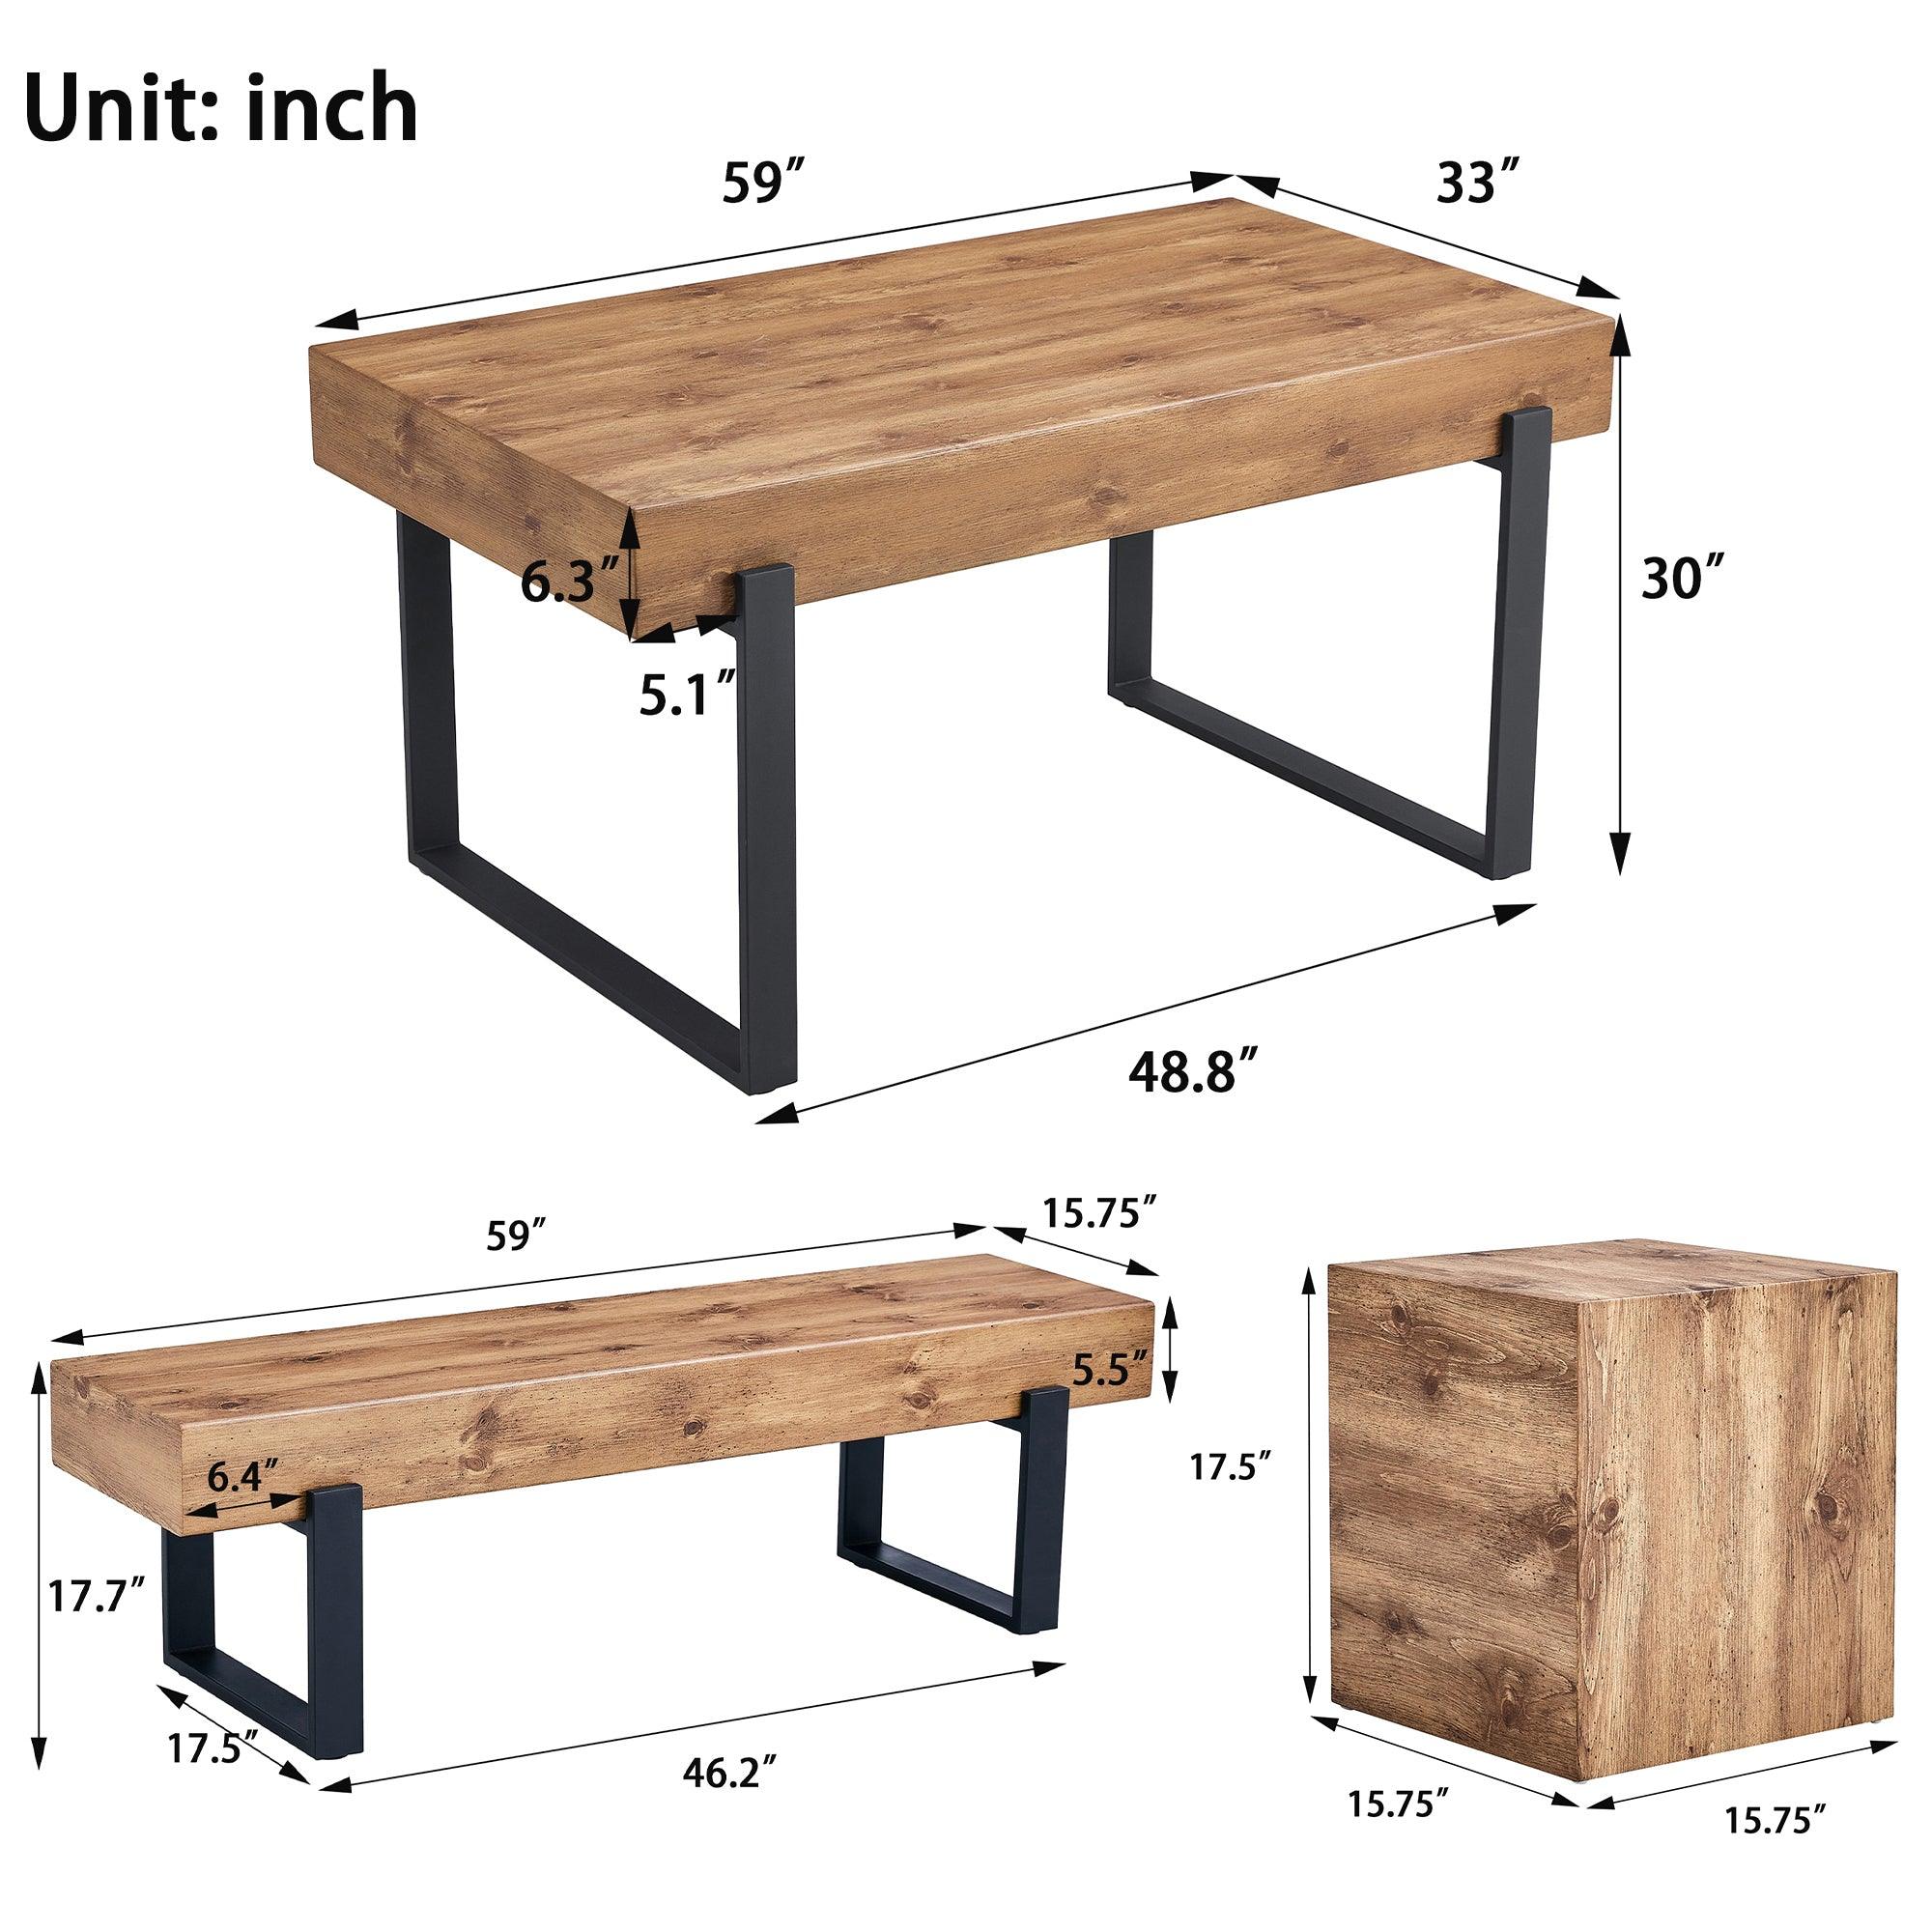 🆓🚛 4-Piece Dining Table Set for 4-6 People, 59" Kitchen Table Set With 1 Bench & 2 Square Stools, Dining Room Table With Heavy-Duty Frame, Easy Assembly, Natural Wood Wash